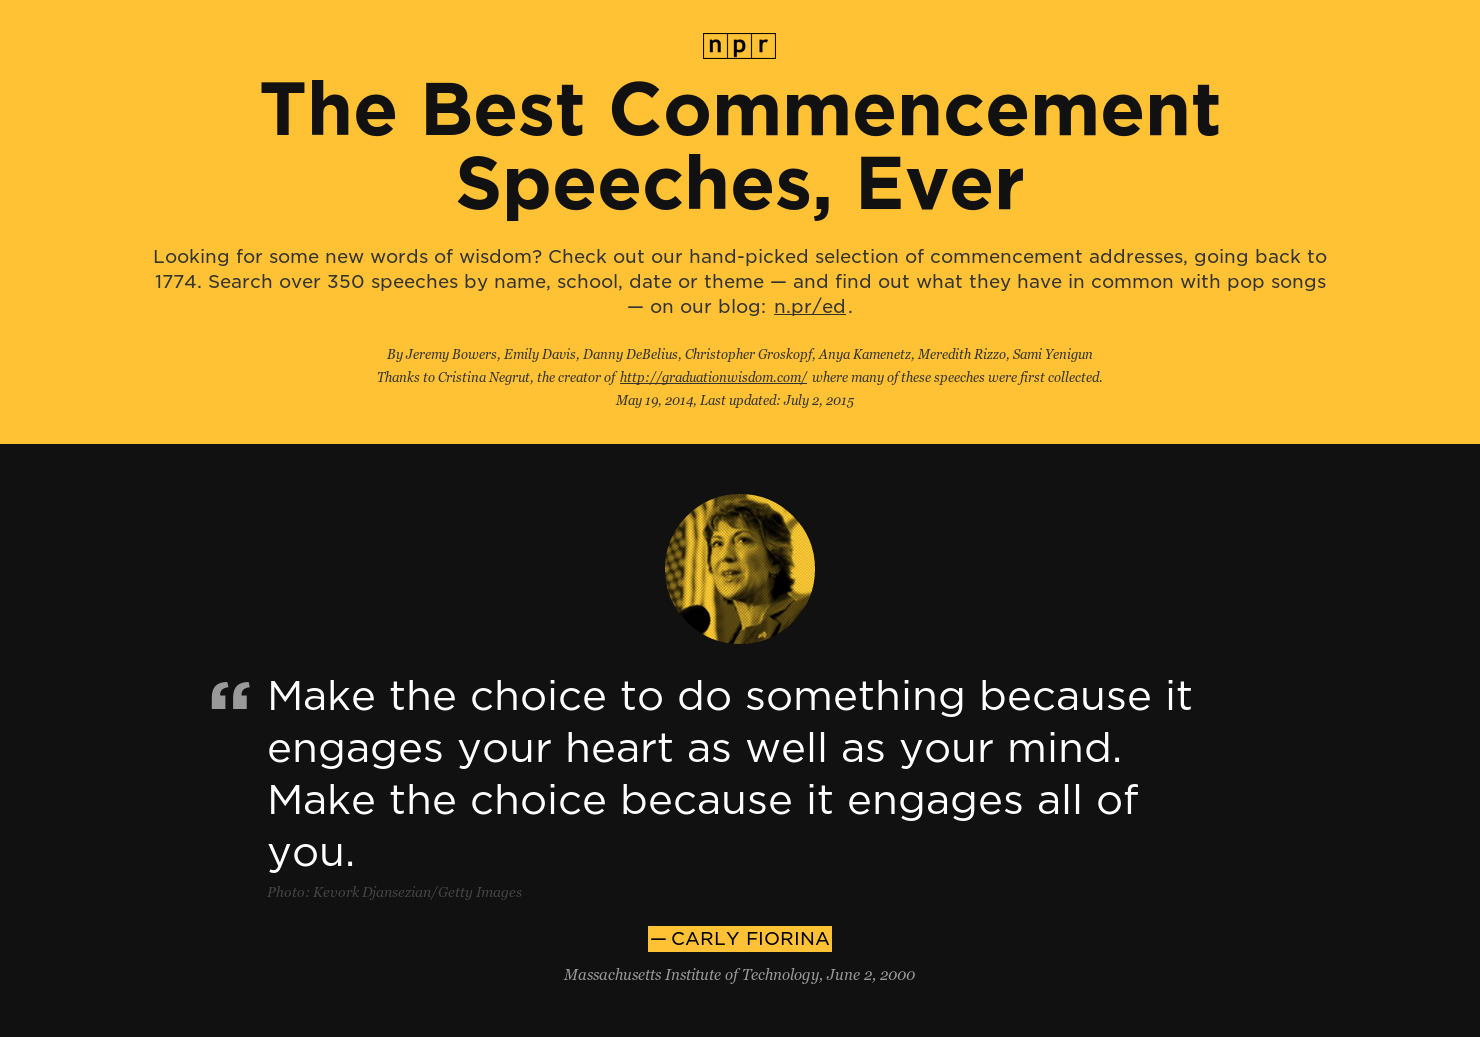 Commencement, by NPR